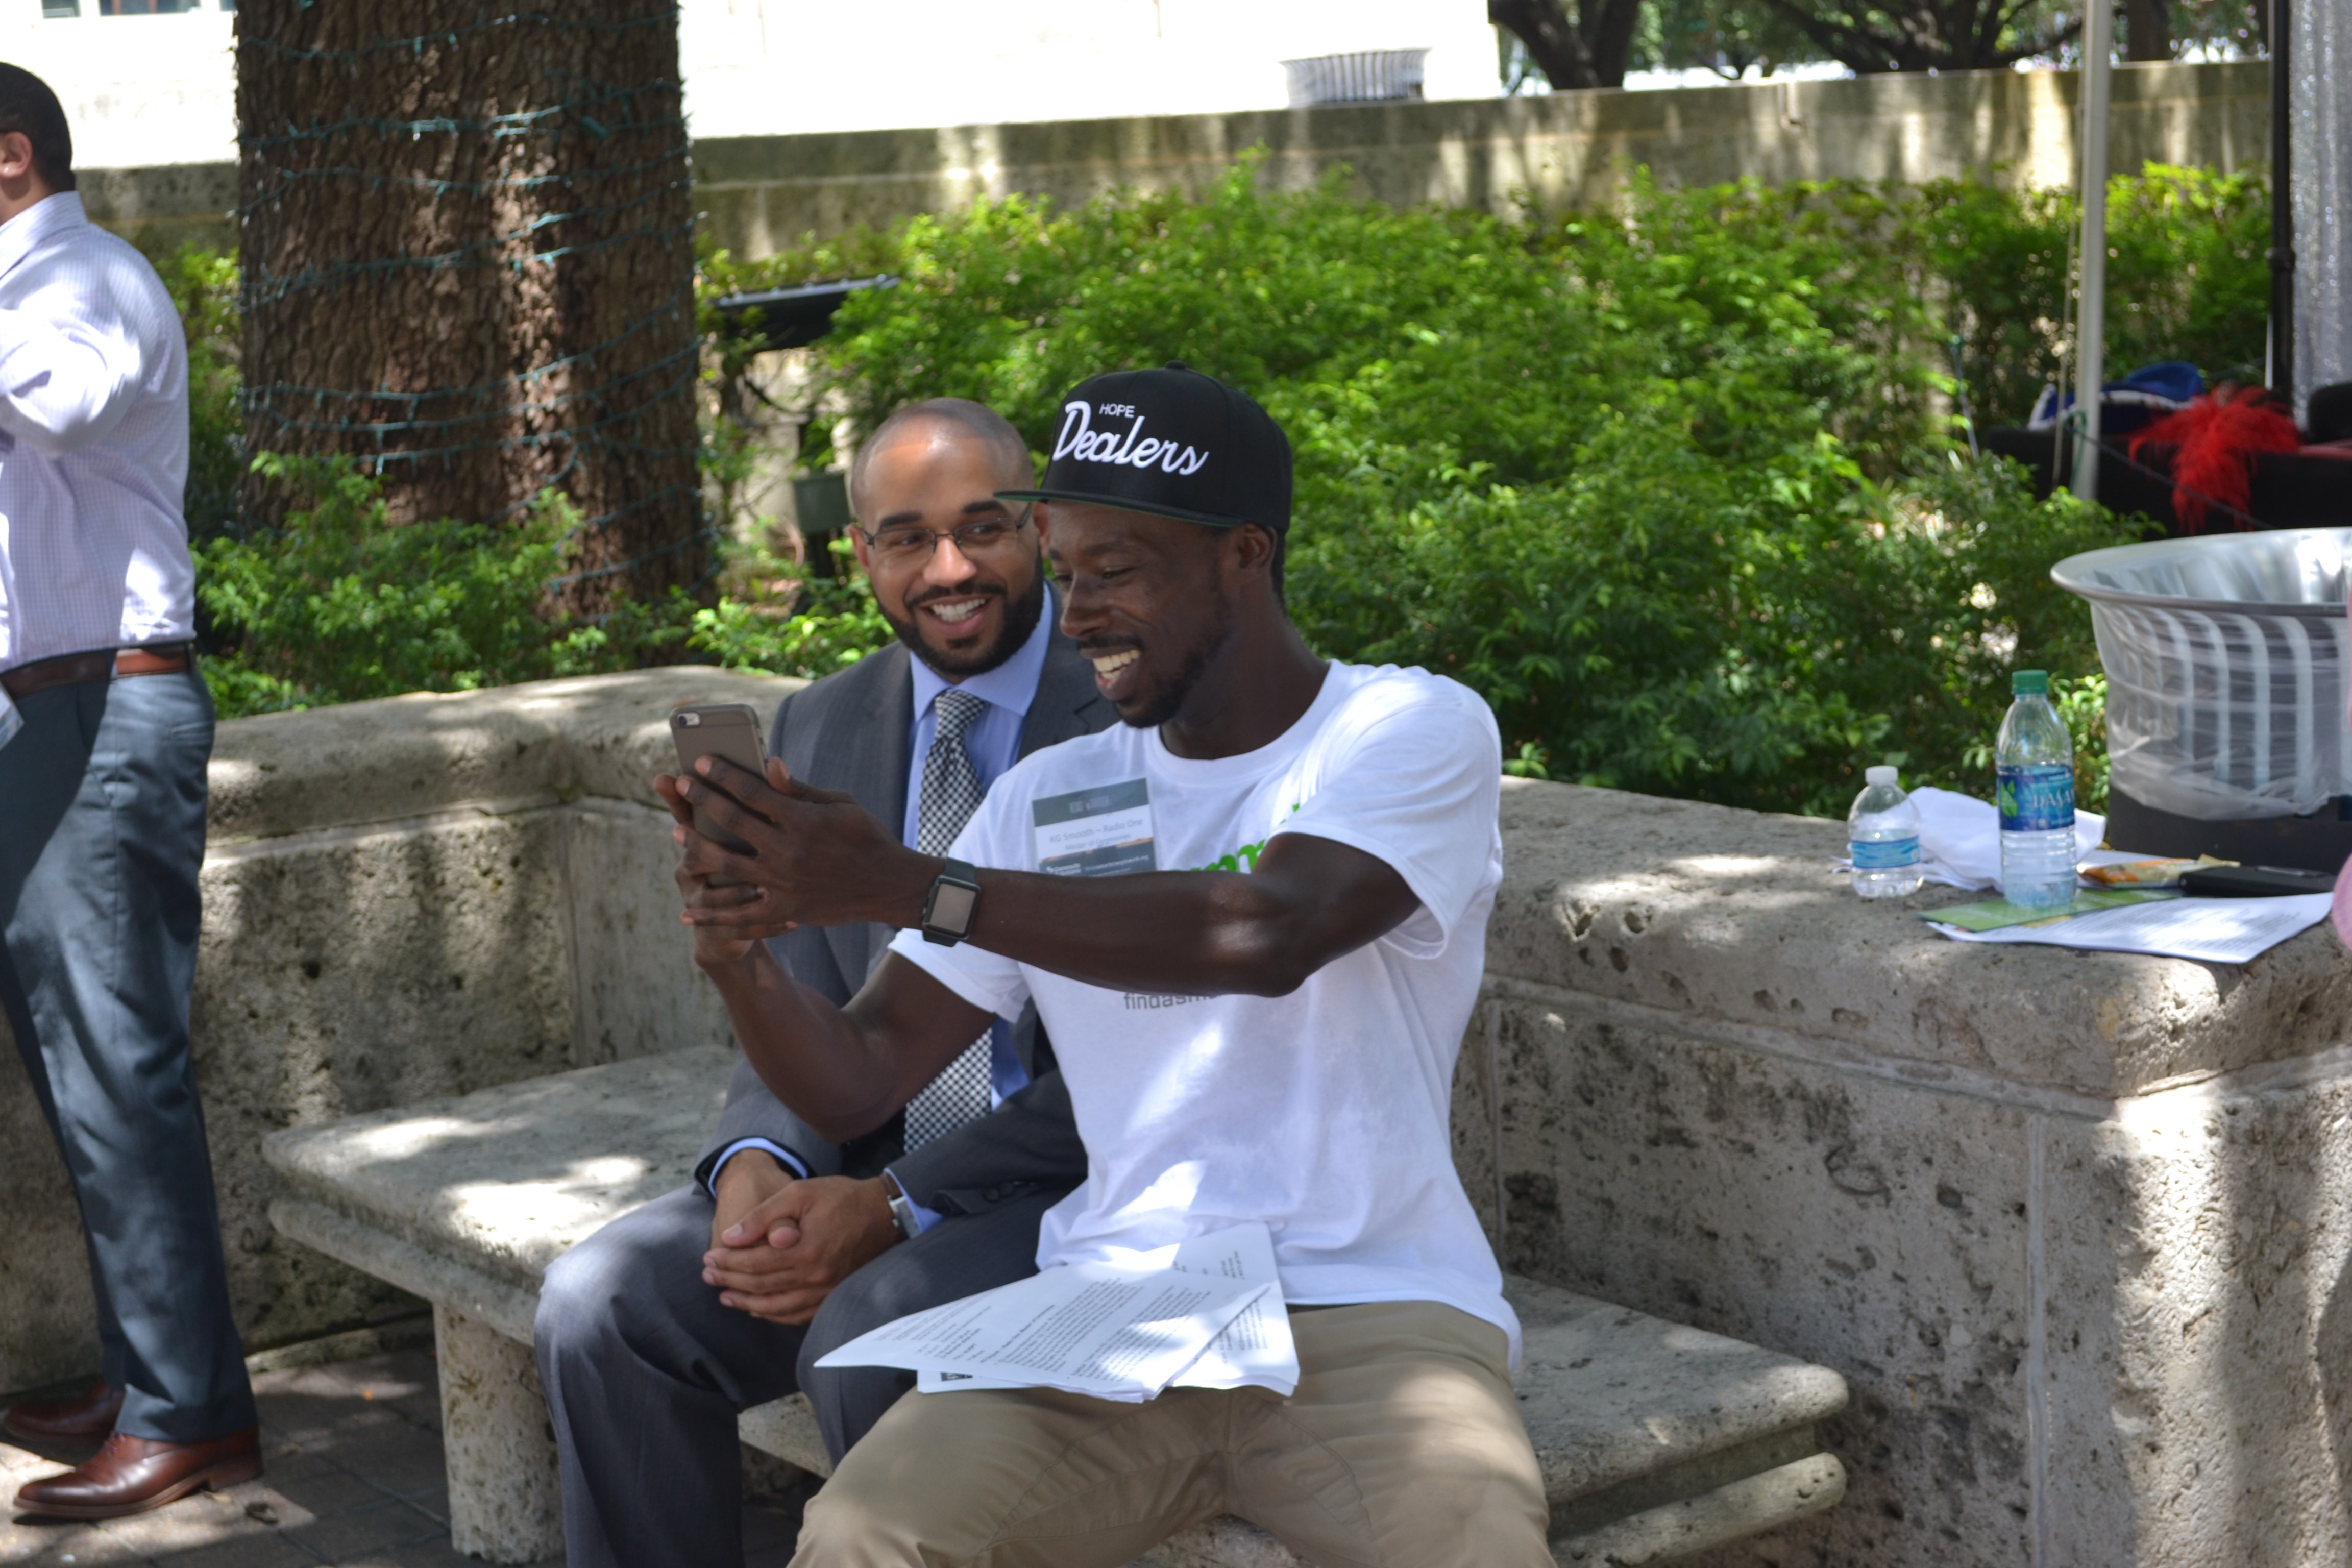 Radio One’s KG Smooth (right) emceed the Road Warriors Festival and snapped selfies with patrons, including H-GAC Assistant Director of Transportation Planning, Eulois Cleckley (left)